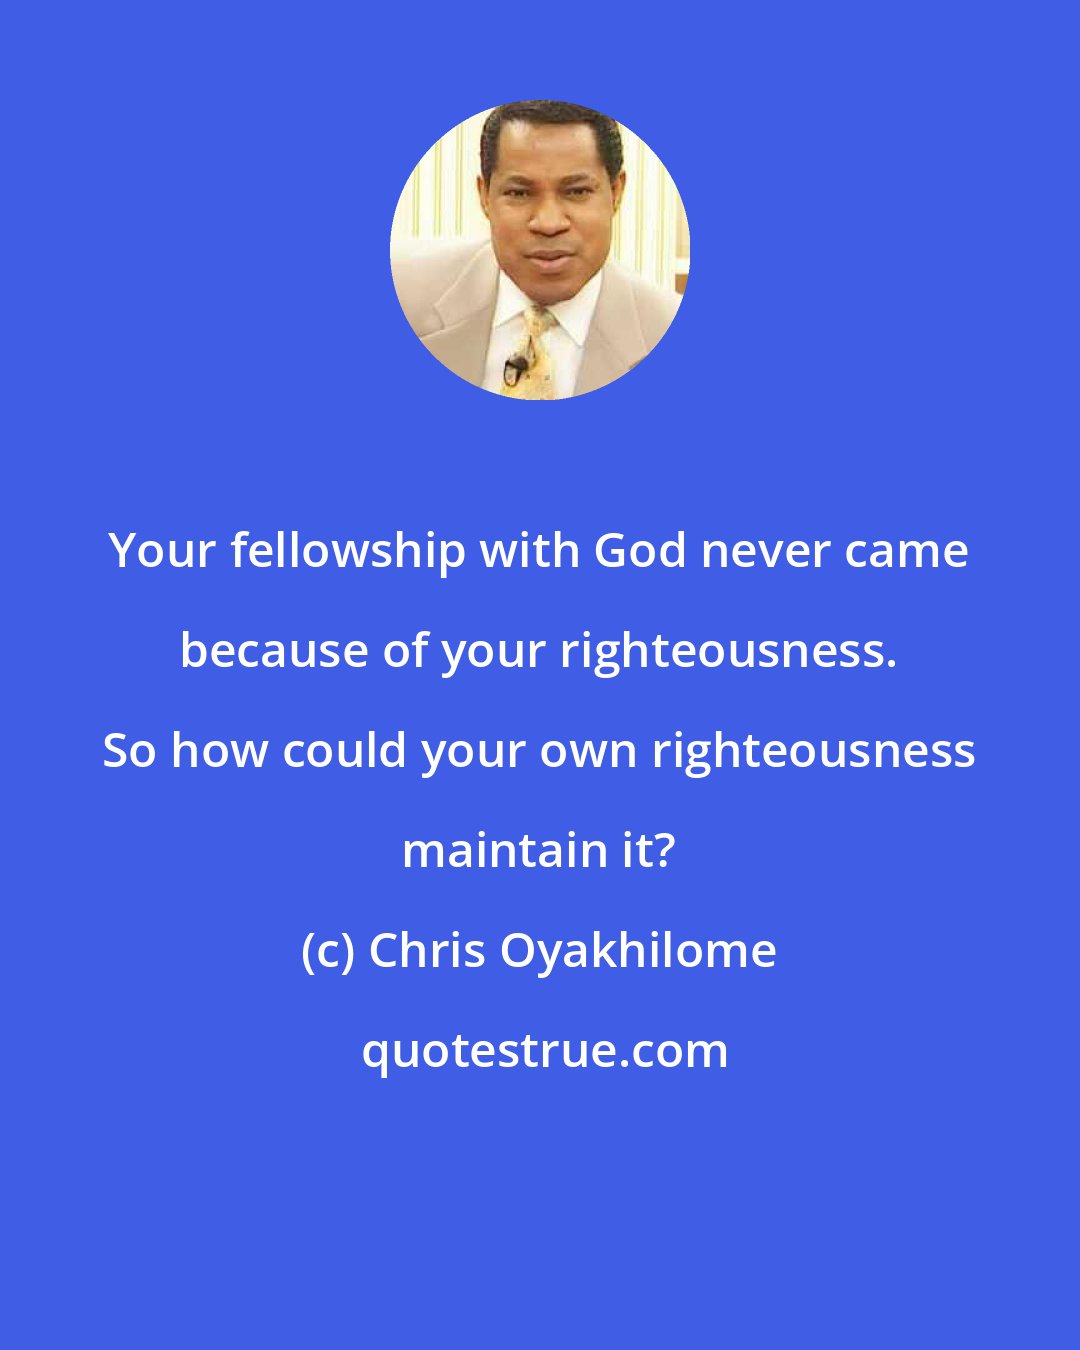 Chris Oyakhilome: Your fellowship with God never came because of your righteousness. So how could your own righteousness maintain it?